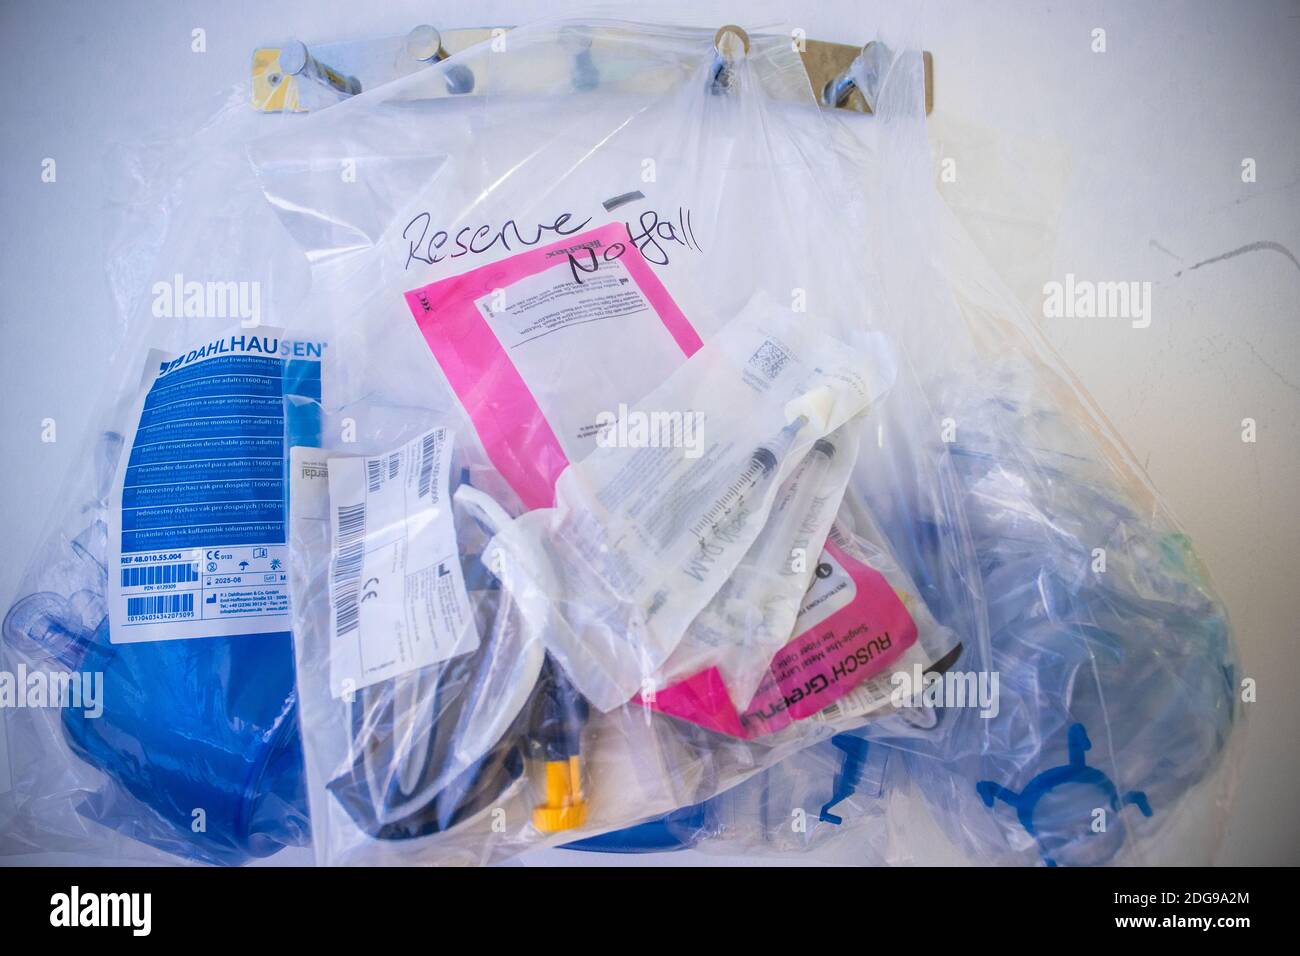 23 November 2020, Mecklenburg-Western Pomerania, Greifswald: Medical aids are in a sealed bag with the label 'Reserve Emergency' in the specially protected part of the intensive care unit of the University Hospital Greifswald for corona patients. Covid-19 patients have been treated at the University Hospital since the beginning of the pandemic. Photo: Jens Büttner/dpa-Zentralbild/ZB Stock Photo